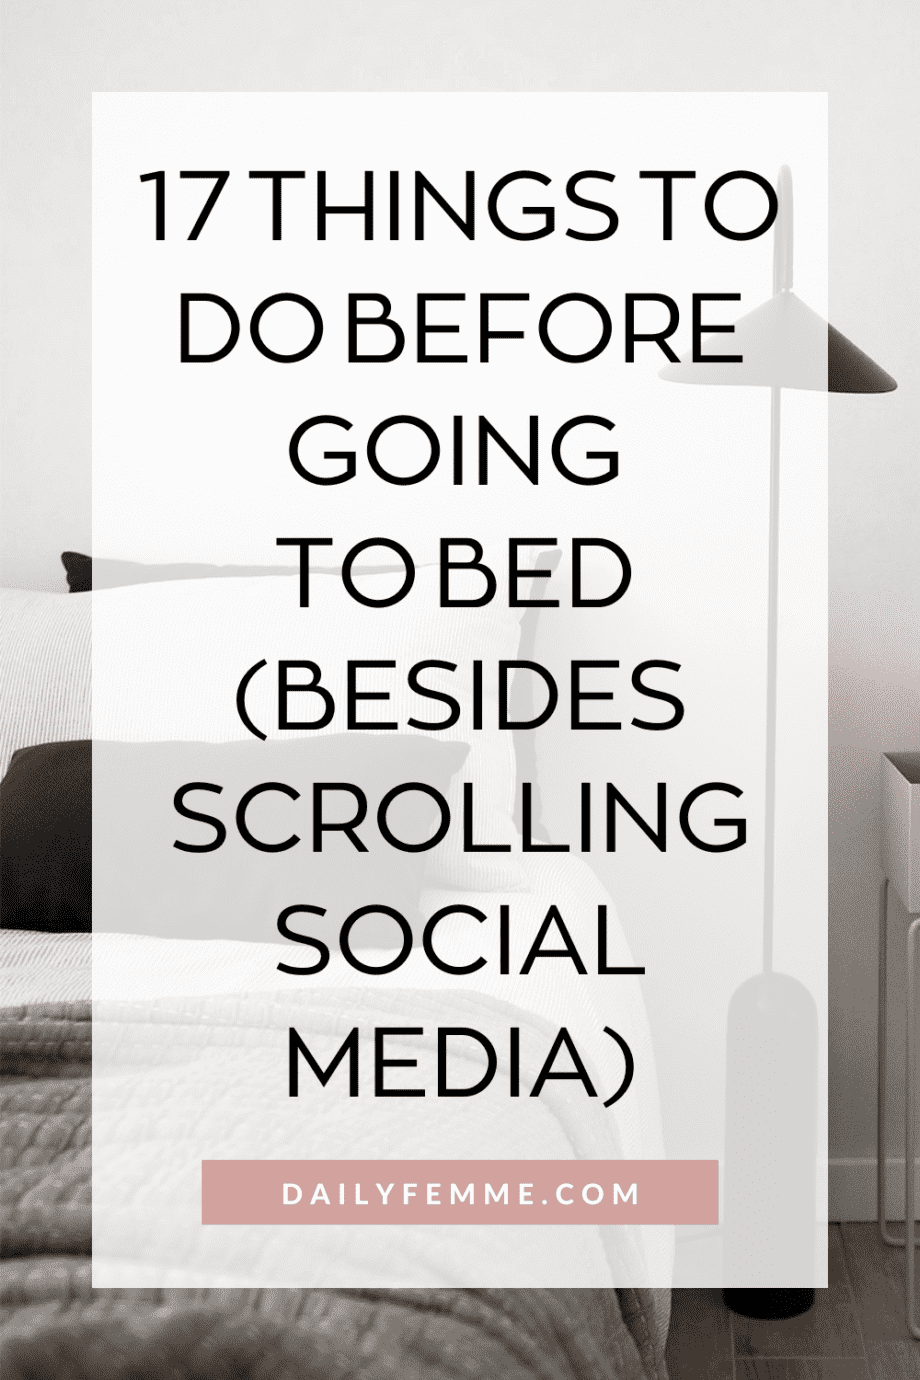 Are you spending your nights scrolling social media and still going to bed too late? Try this list of things to do before going to be instead